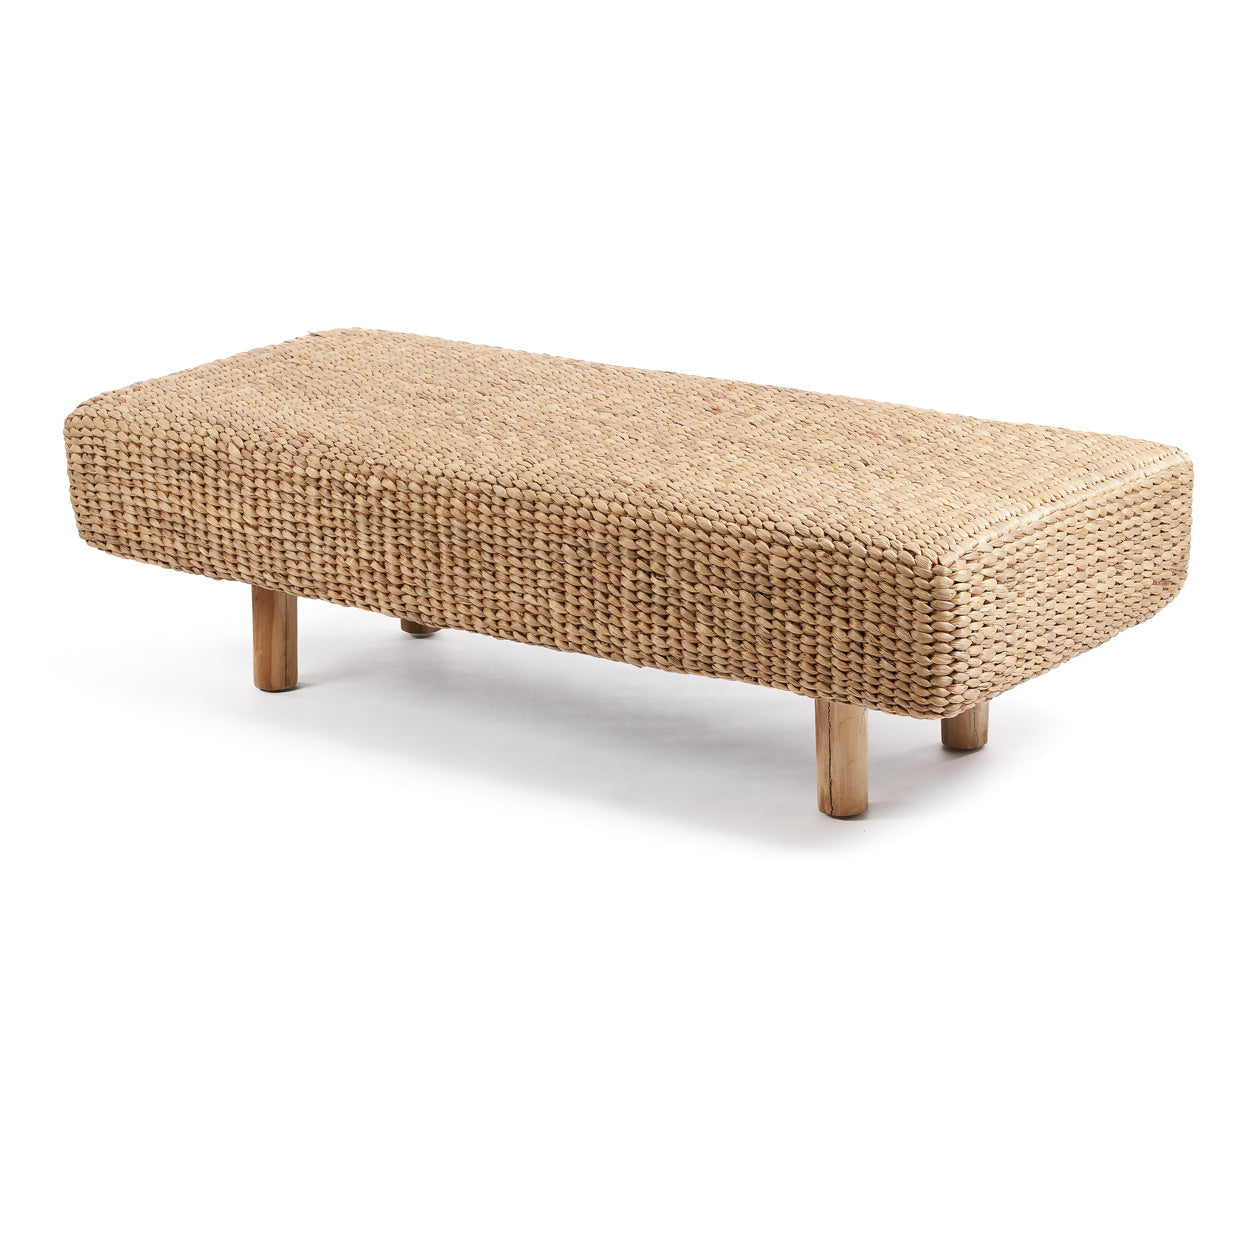 The Water Hyacinth Bench